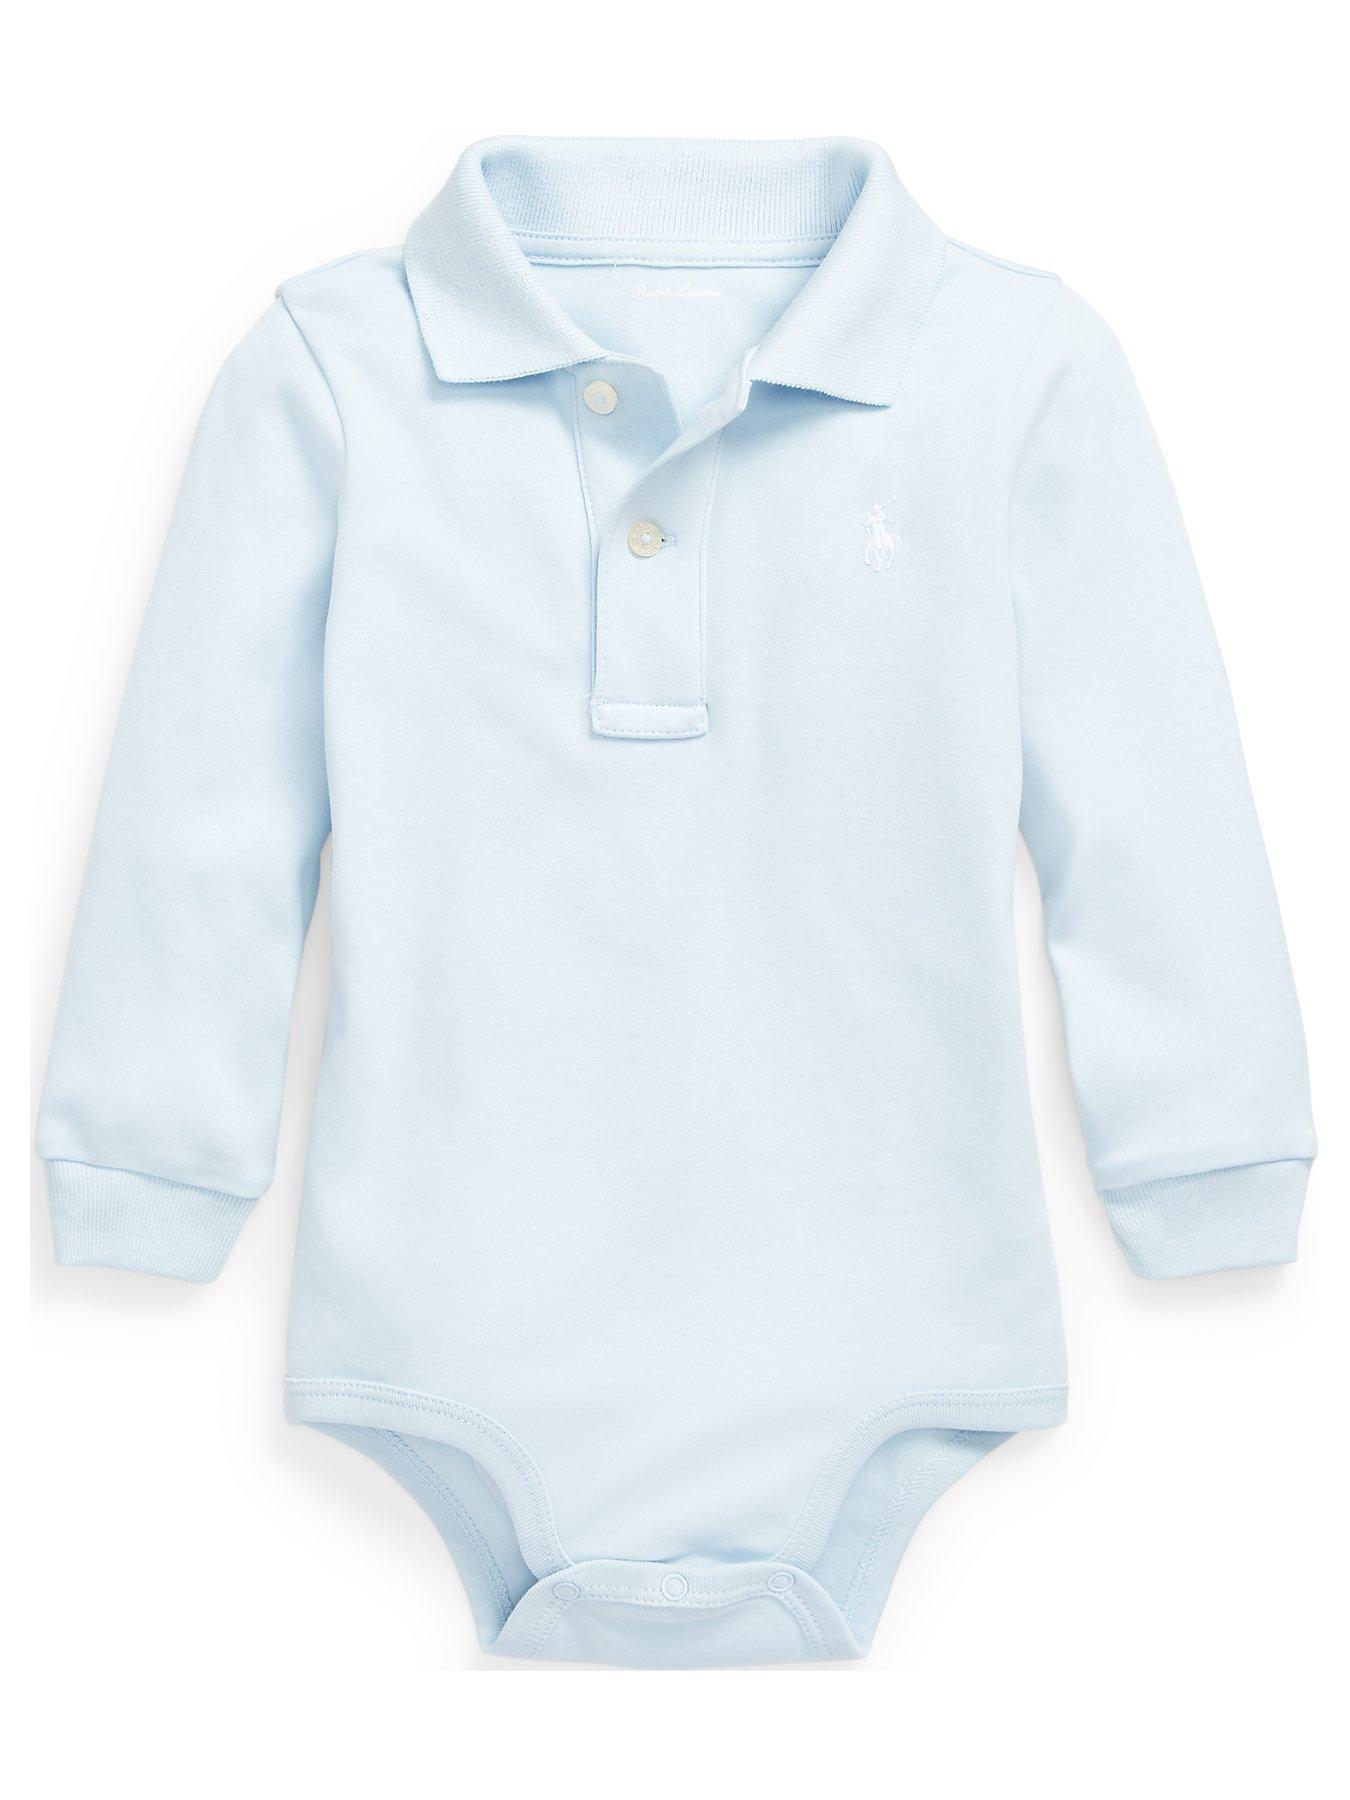 polo sweat suits for infants